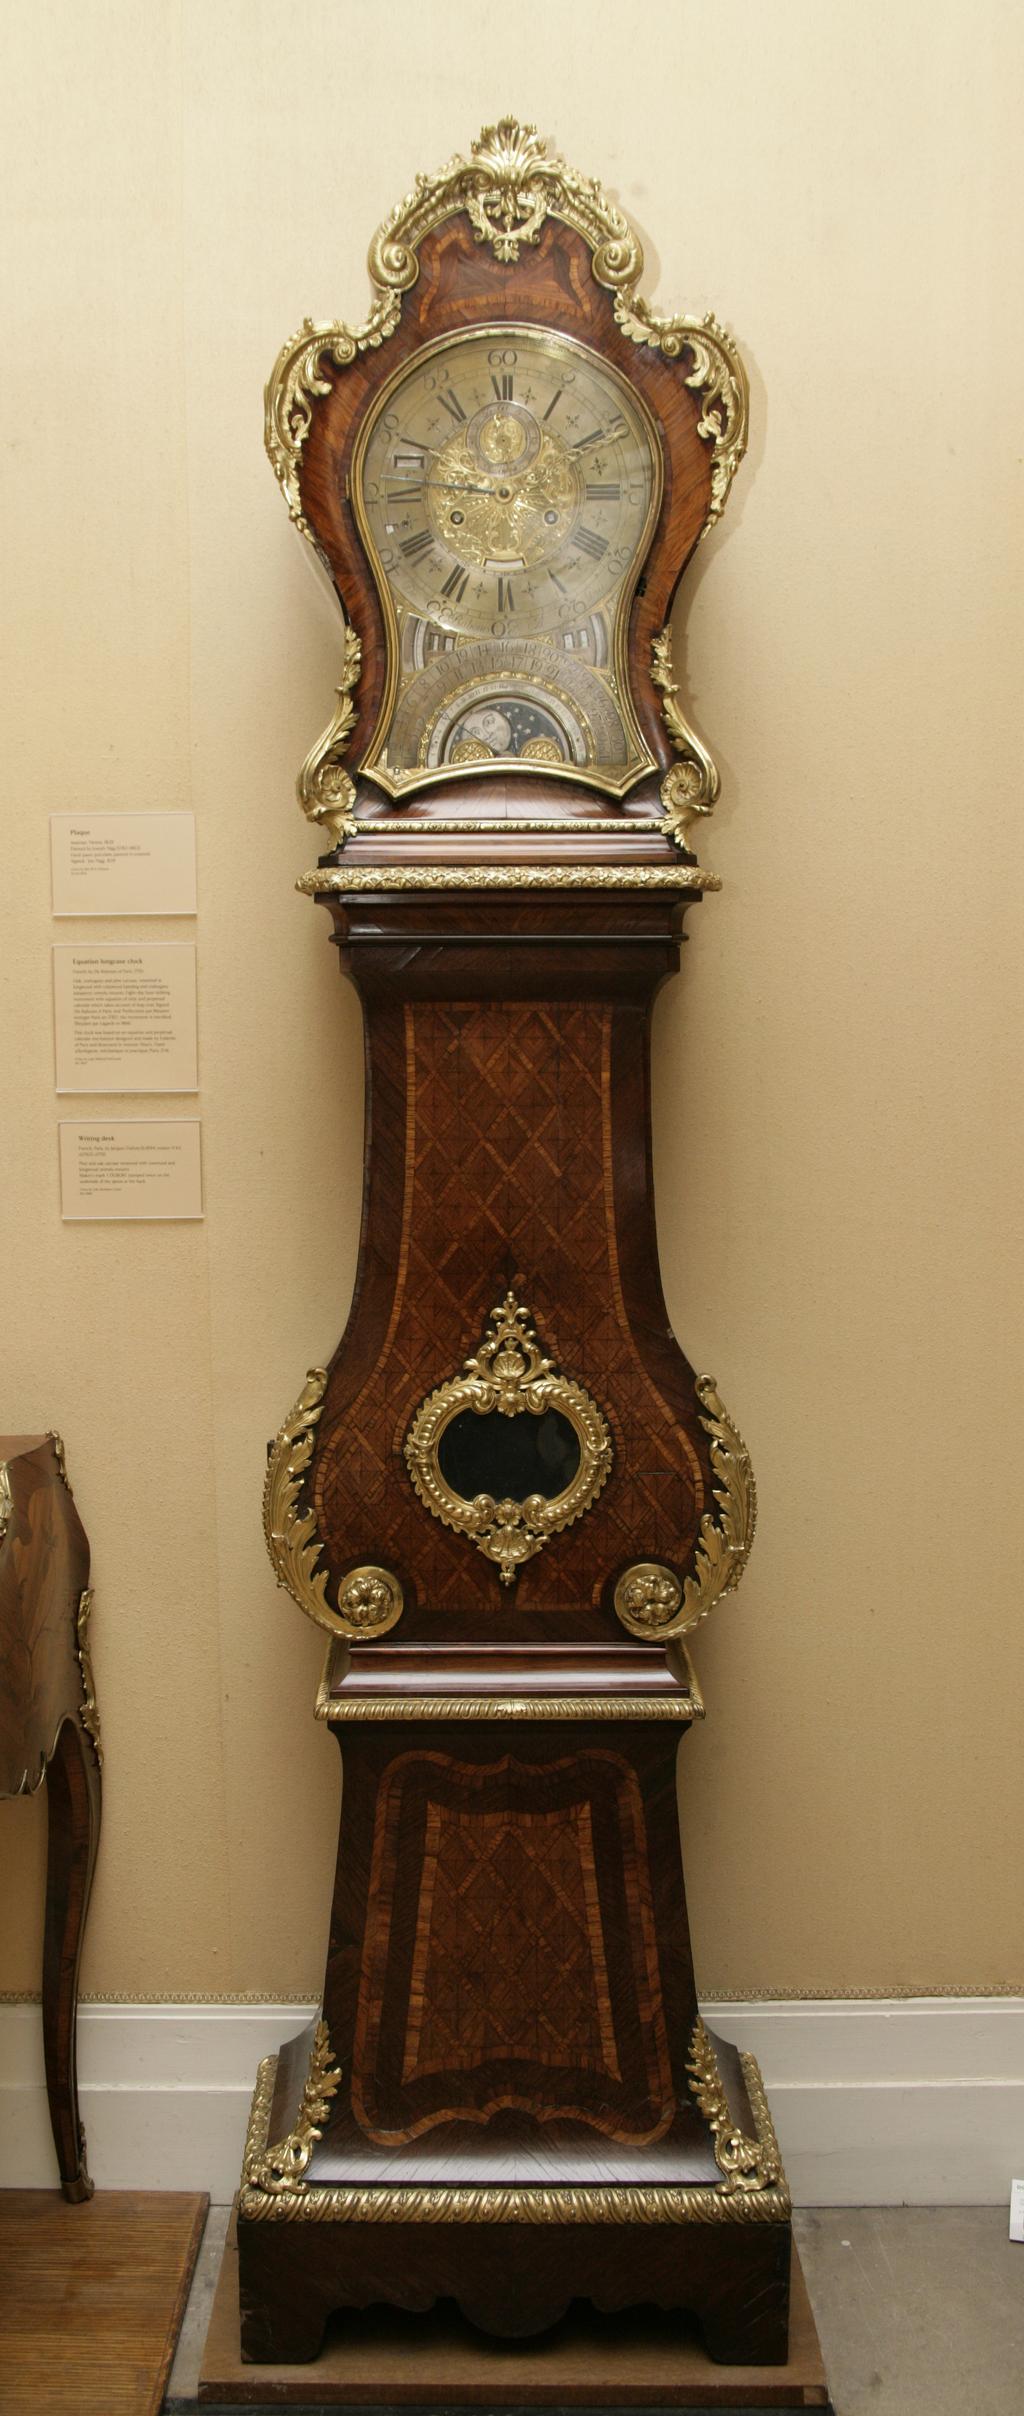 An image of Equation Longcase Clock. De Rabours, France, Paris, Colmar. Equation longcase clock with 8 day hour striking movement and perpetual calendar which takes account of leap year. Louis XV style case. Dial: Elaborately shaped dial plate 11 1/2 inches wide and 17 inches high, with applied English style chapter ring and seconds ring. The dial plate gilt, the chapter ring and all subsidiary dials silvered. Signed on lower edge of chapter ring ‘De Rabours A Paris' and at base of dial plate ‘Perfectione par Meunier horloger Paris an.1782'. The lower third of the dial is occupied by a semi-circular day of the month indicator with fly back hand, and within the date ring is a simple lunar dial with a scale of days 1 - 29 1/2 and a rotating disc with two moons to point to the age alternately and show the phases. Below the chapter ring at VII are openings to show the times of sunrise and the sun's position in the zodiac. Similar openings below V show the times of sunset and an annual calendar. A slot inside the chapter ring above VI shows the year in the leap year cycle. The day of the week is shown in a slot in the chapter ring near X. The calendar is set by means of a small squared arbor in an aperture in the chapter ring between VIII and IX, with an adjacent opening so that the calendar can be set to change over at midnight. A lever in a slot outside the chapter ring at X is used to set the maintain¬ing power. Mean time is indicated by pierced and carved gilt brass minute and hour hands, and solar time is shown by a blued steel minute hand. The brass seconds hand is a replacement of 19th century English type. Movement: 8 day hour striking movement with equation of time and perpetual calendar which takes account of leap year. The going train is weight driven with an anchor escapement and bolt type main¬taining power without shutters. The striking train is spring driven with a going barrel and strikes on the solar hours, which is usual on French equation clocks. The bell